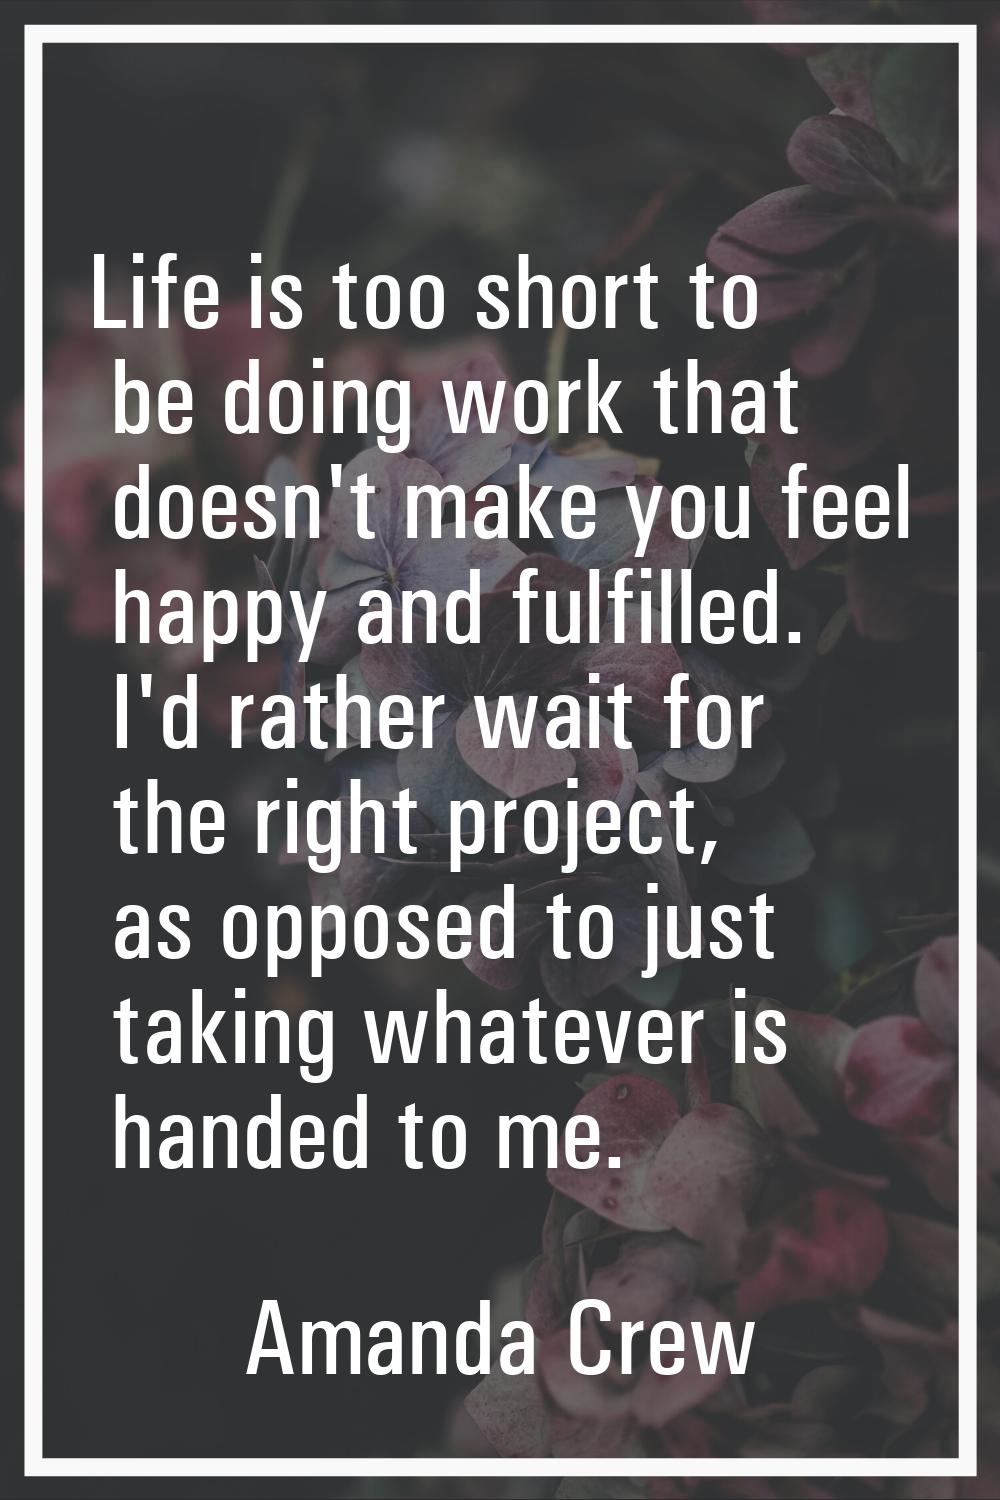 Life is too short to be doing work that doesn't make you feel happy and fulfilled. I'd rather wait 